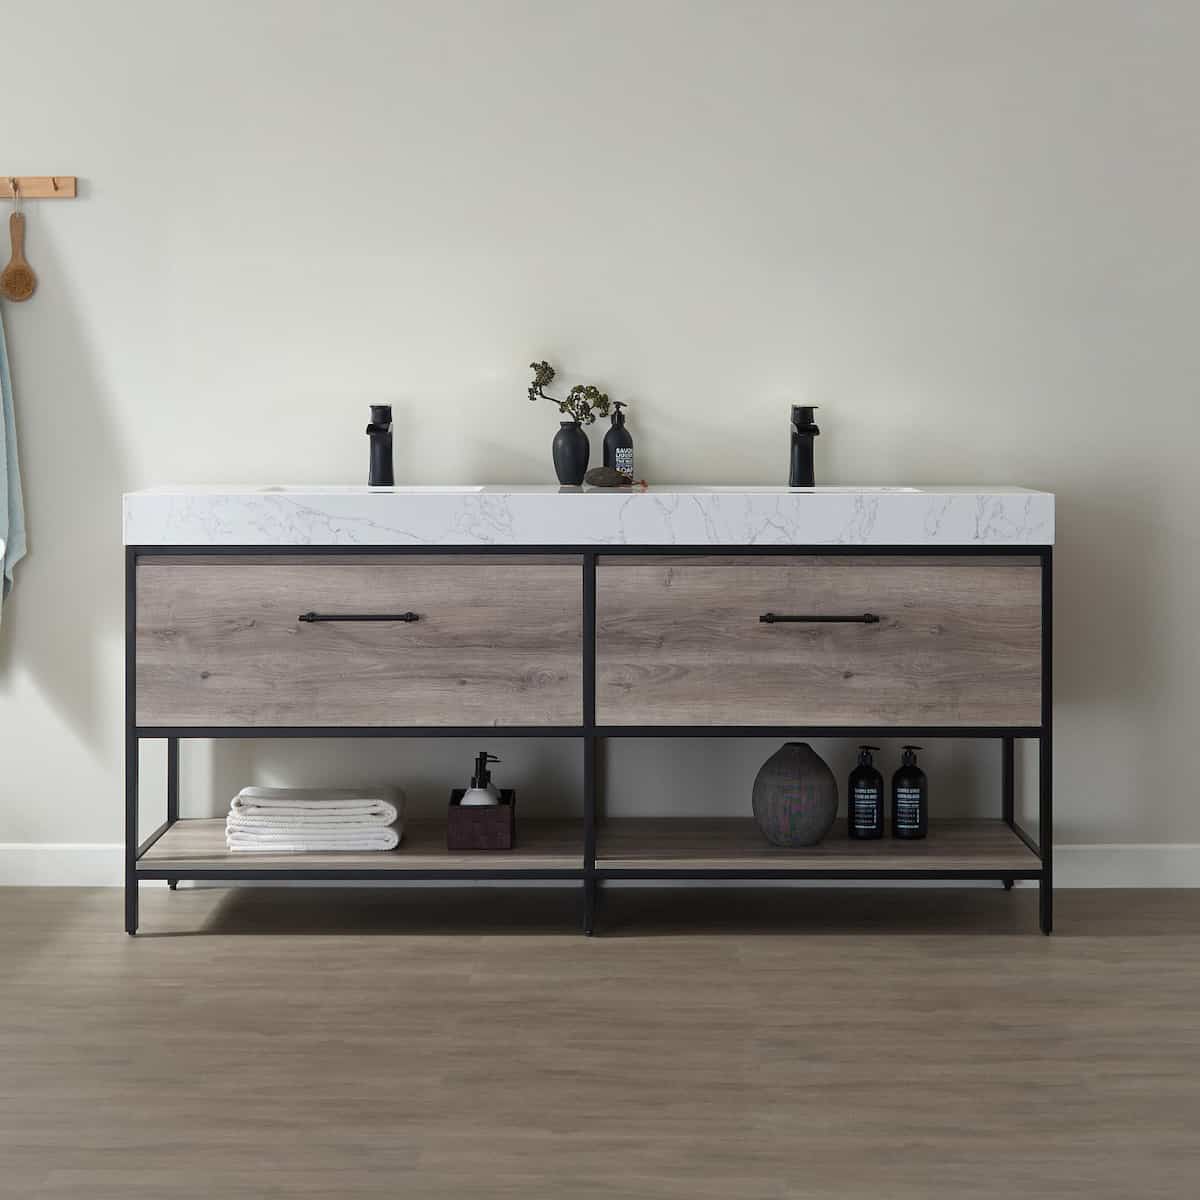 Vinnova Palma 72 Inch Freestanding Double Vanity in Mexican Oak with White Composite Grain Stone Countertop Without Mirrors in Bathroom 701272-MXO-GW-NM